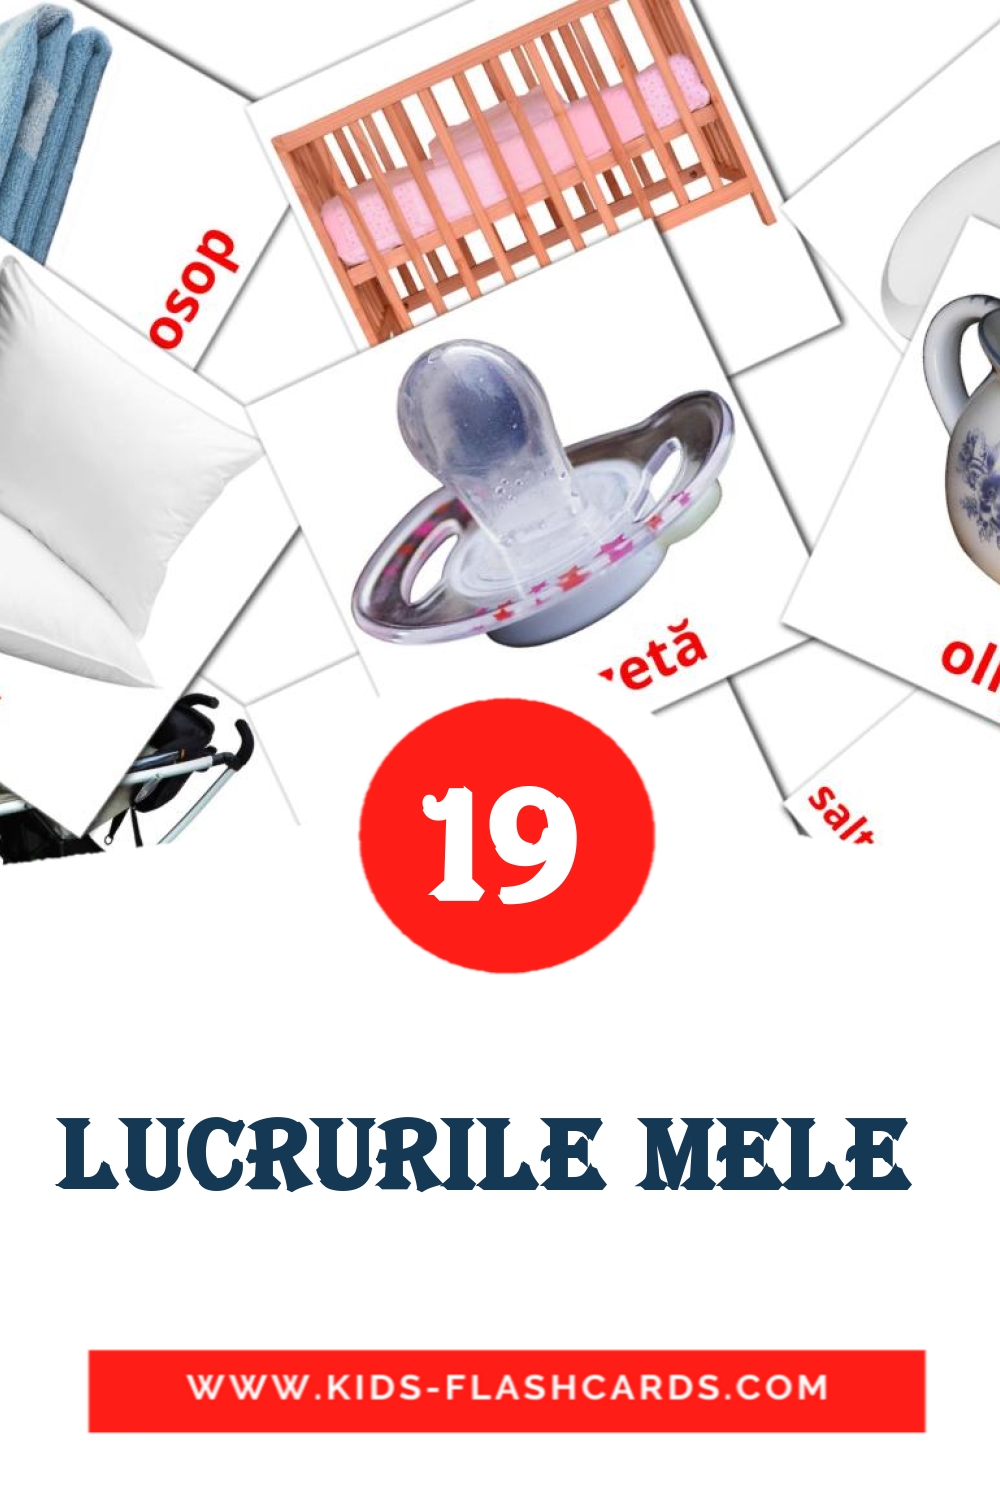 19 Lucrurile mele  Picture Cards for Kindergarden in romanian